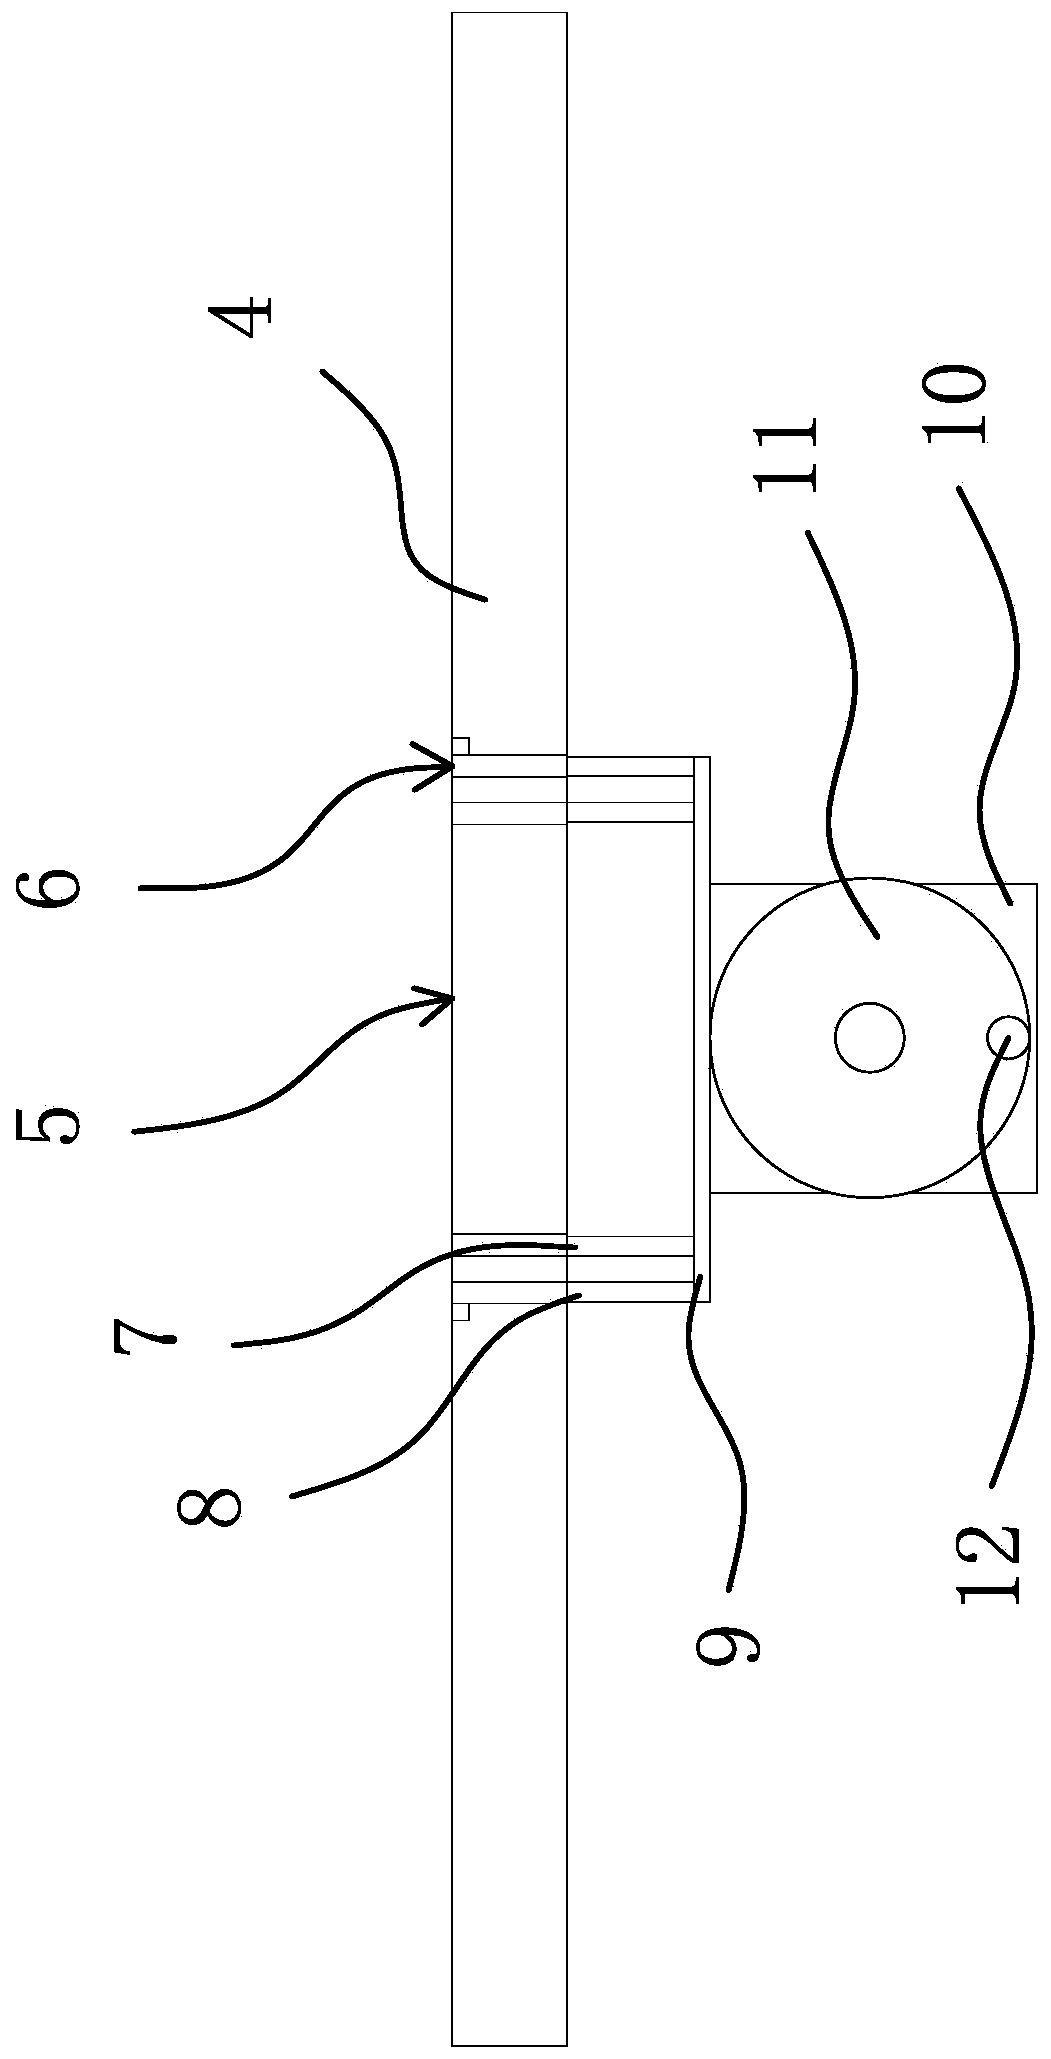 An automatic assembly device for luggage connectors